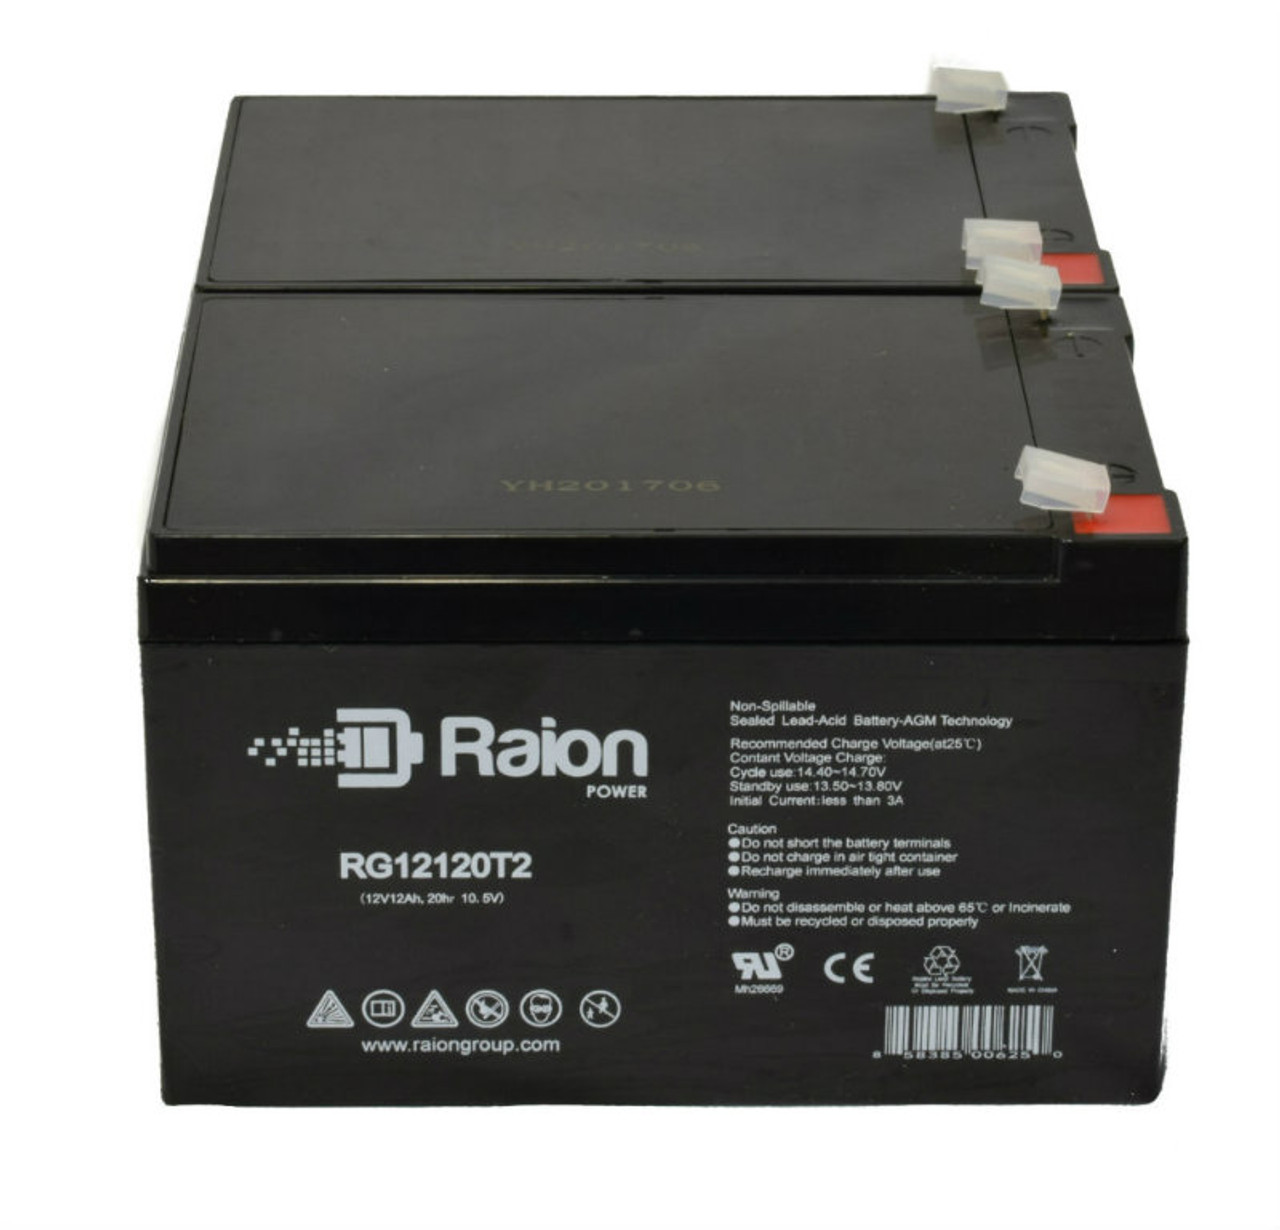 Raion Power 12V 12Ah Non-Spillable Compatible Replacement Battery for Koyama NP15-12 - (2 Pack)